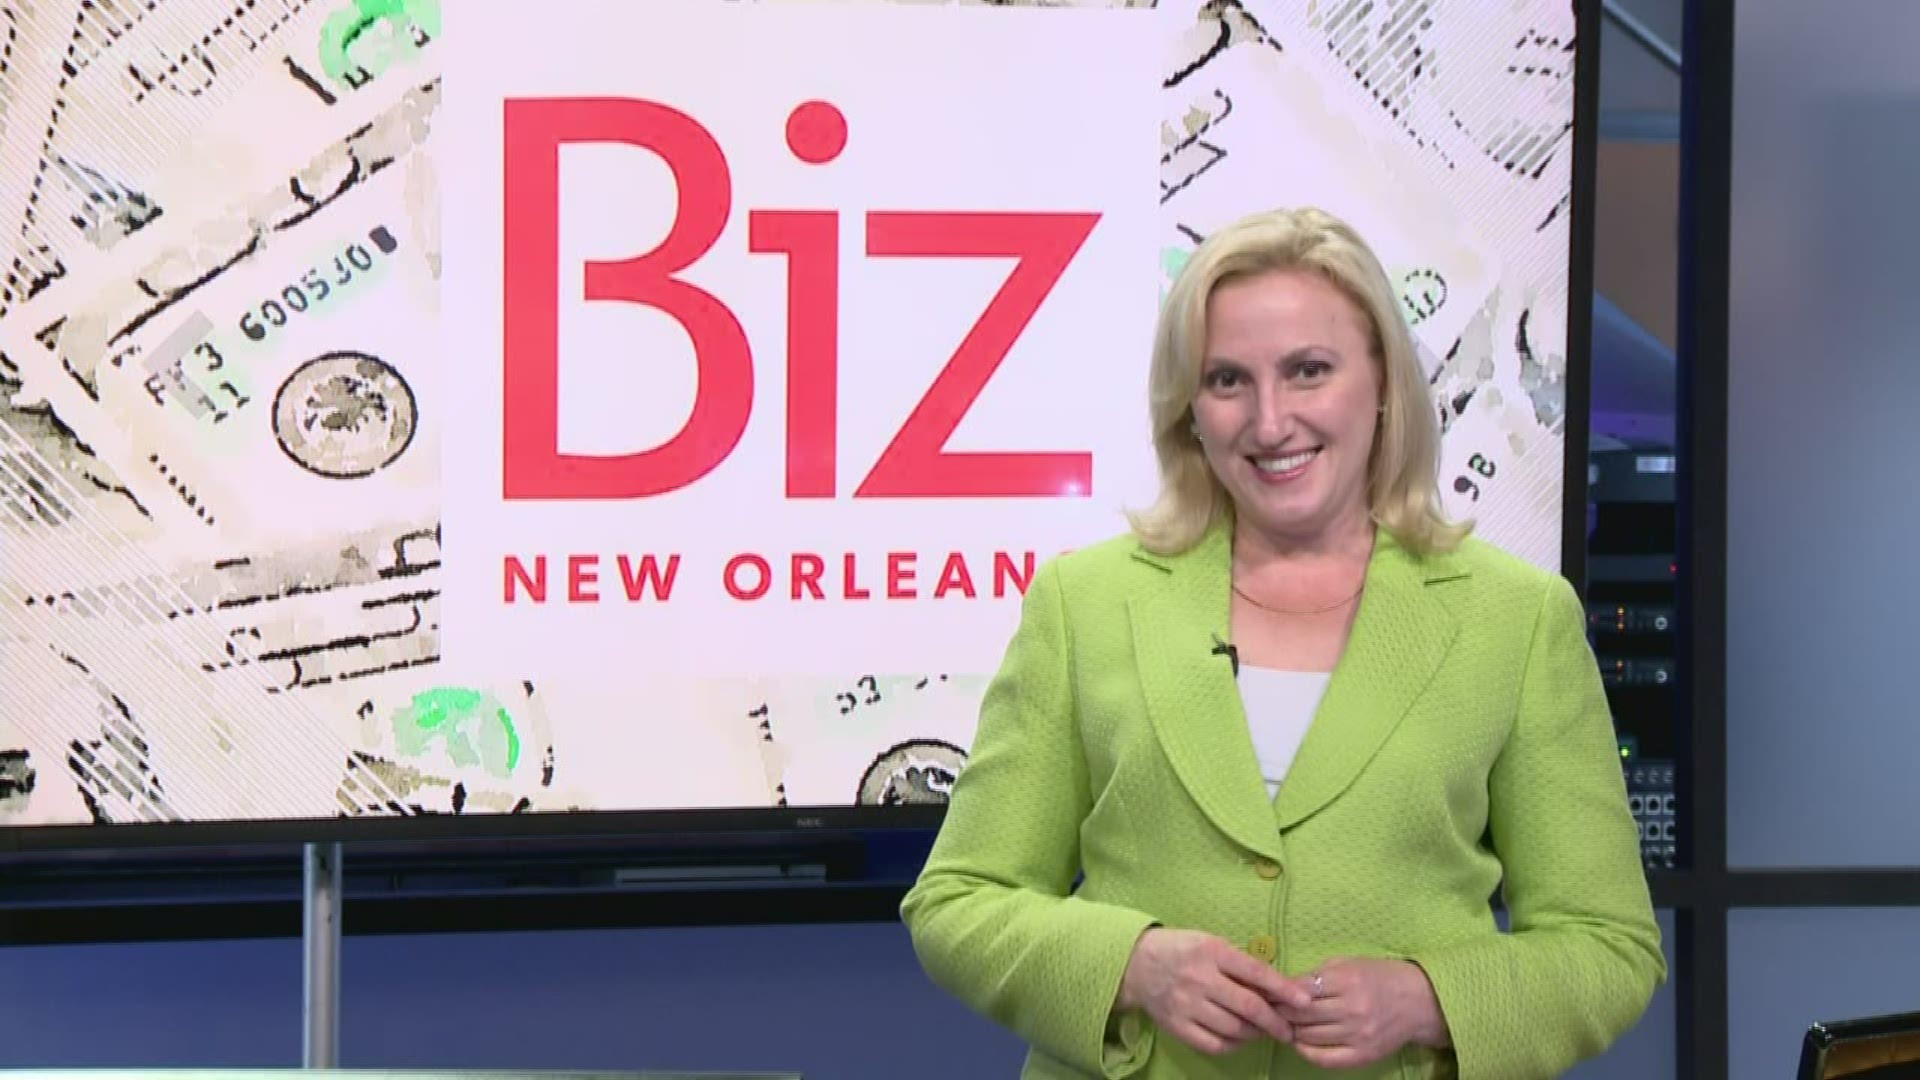 If your adult children ask you for a loan to fund their new business or buy their first house, should you lend them the money? BizNewOrleans.com's Leslie Snadowsky says there are pros and cons and several ways to keep the peace.